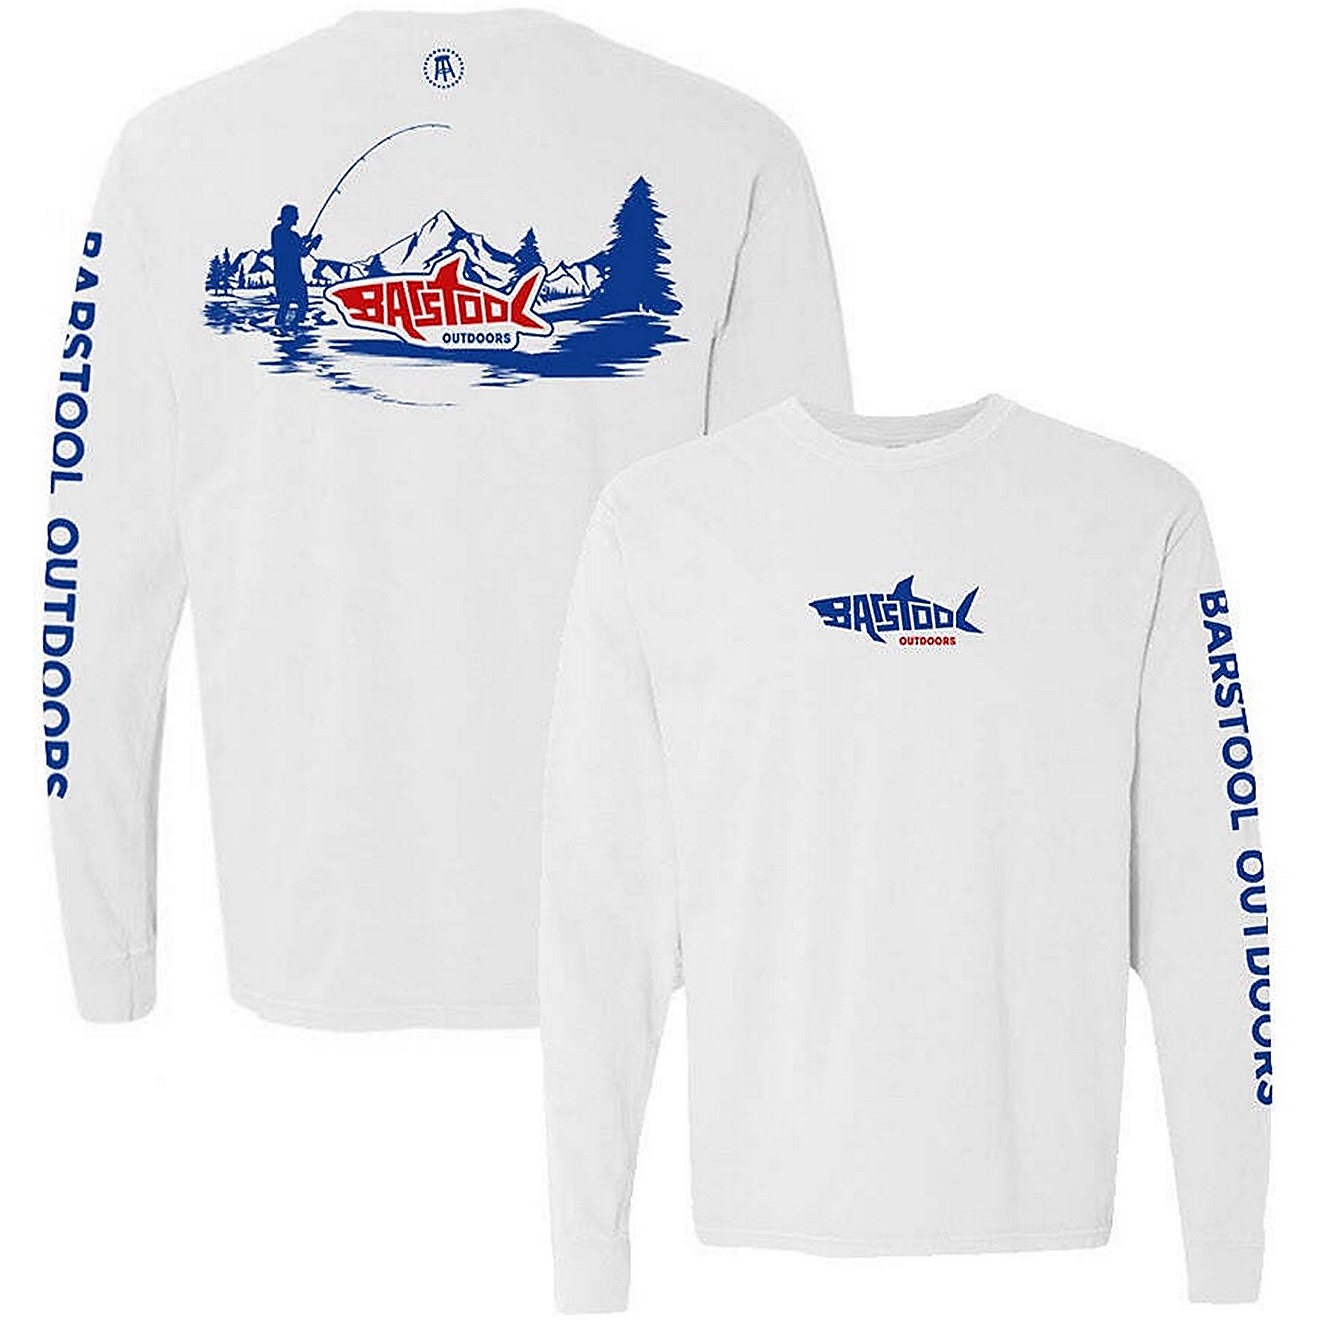 Barstool Sports Men's Fishing Long Sleeve Graphic T-shirt                                                                        - view number 1